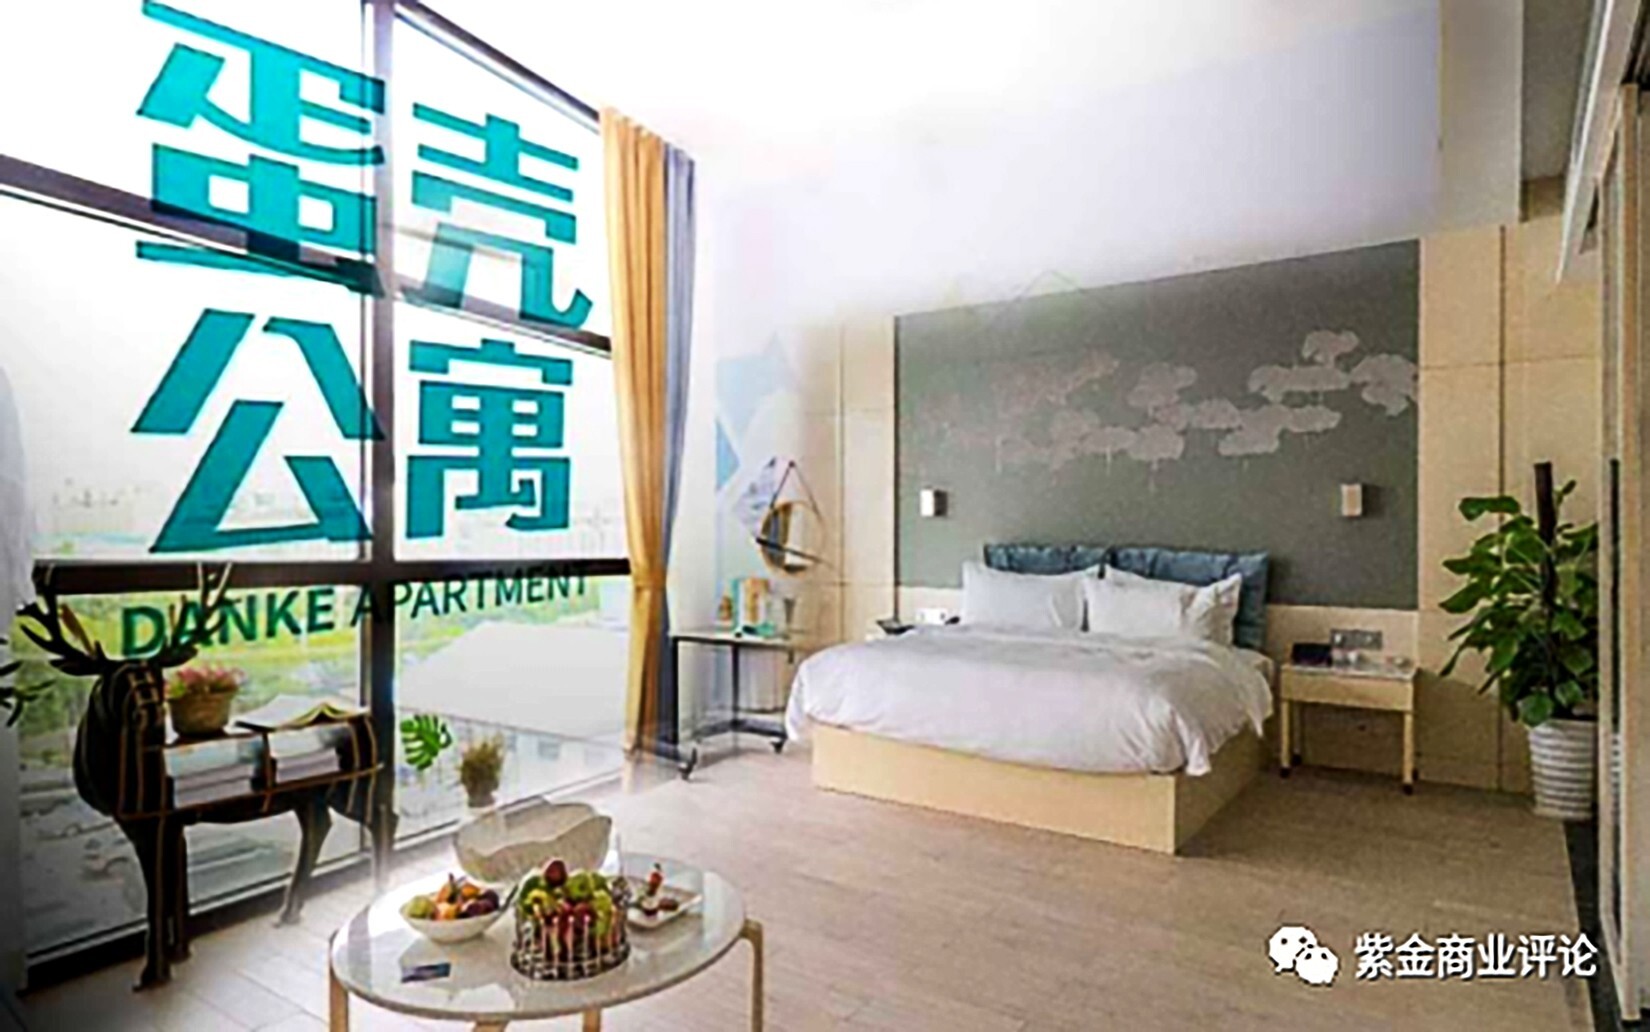 Danke’s crisis has sparked several conflicts between landlords and tenants after the company missed payments to owners, employees and contractors. Photo: Weibo